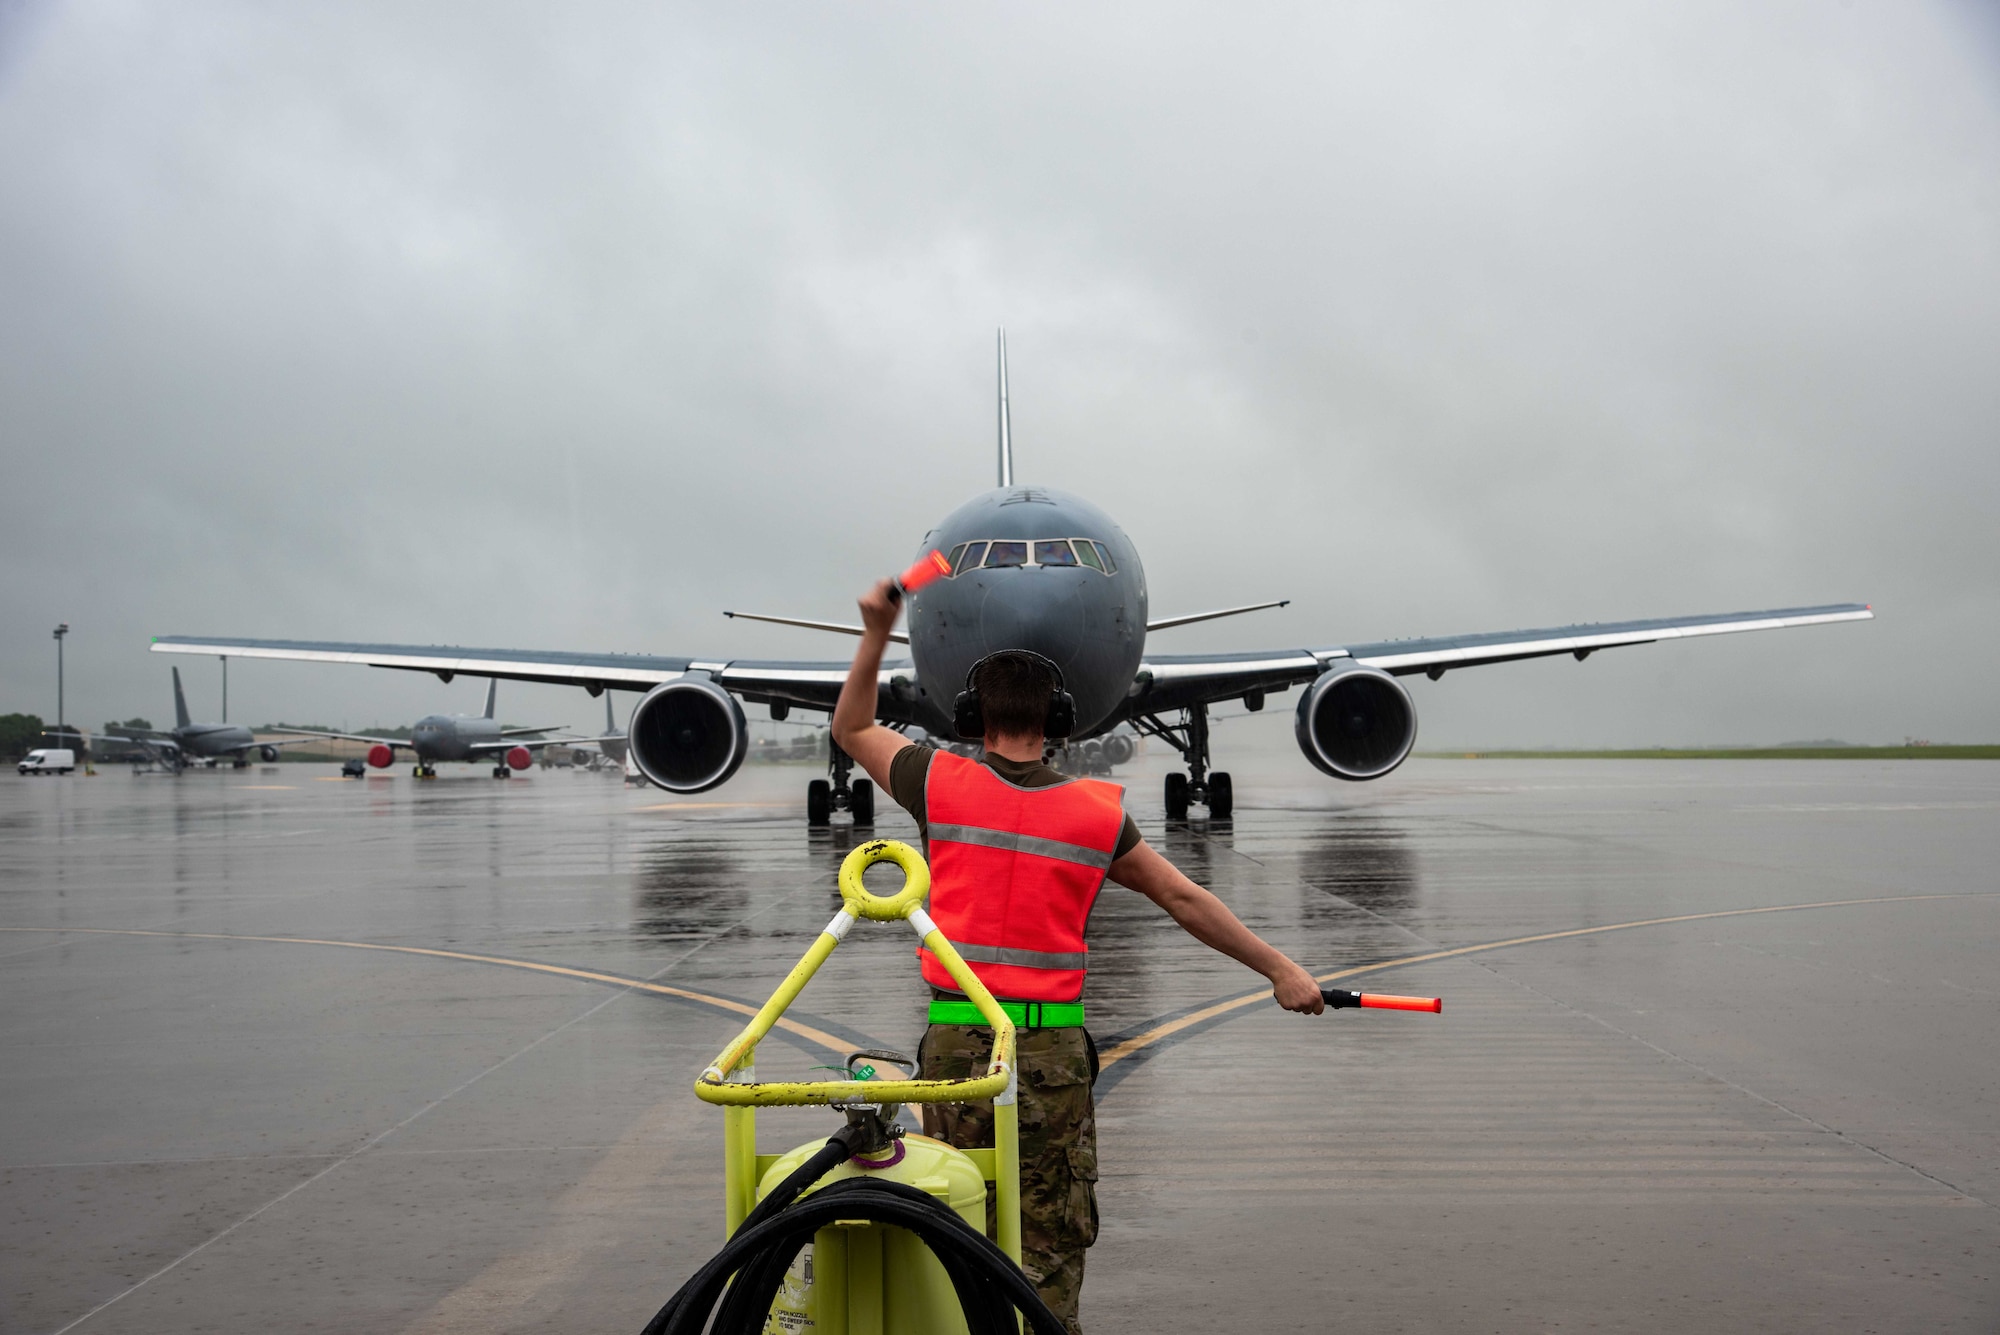 U.S. Air Force Airman 1st Class Reilly Avery, 22nd Aircraft Maintenance Squadron crew chief, marshals out a KC-46A Pegasus at McConnell Air Force Base, Kansas, June 30, 2021. The Aircraft delivered 60,000 pounds of fuel in support of Bat Wars training exercise. (U.S. Air Force photo by Airman 1st Class Zachary Willis)